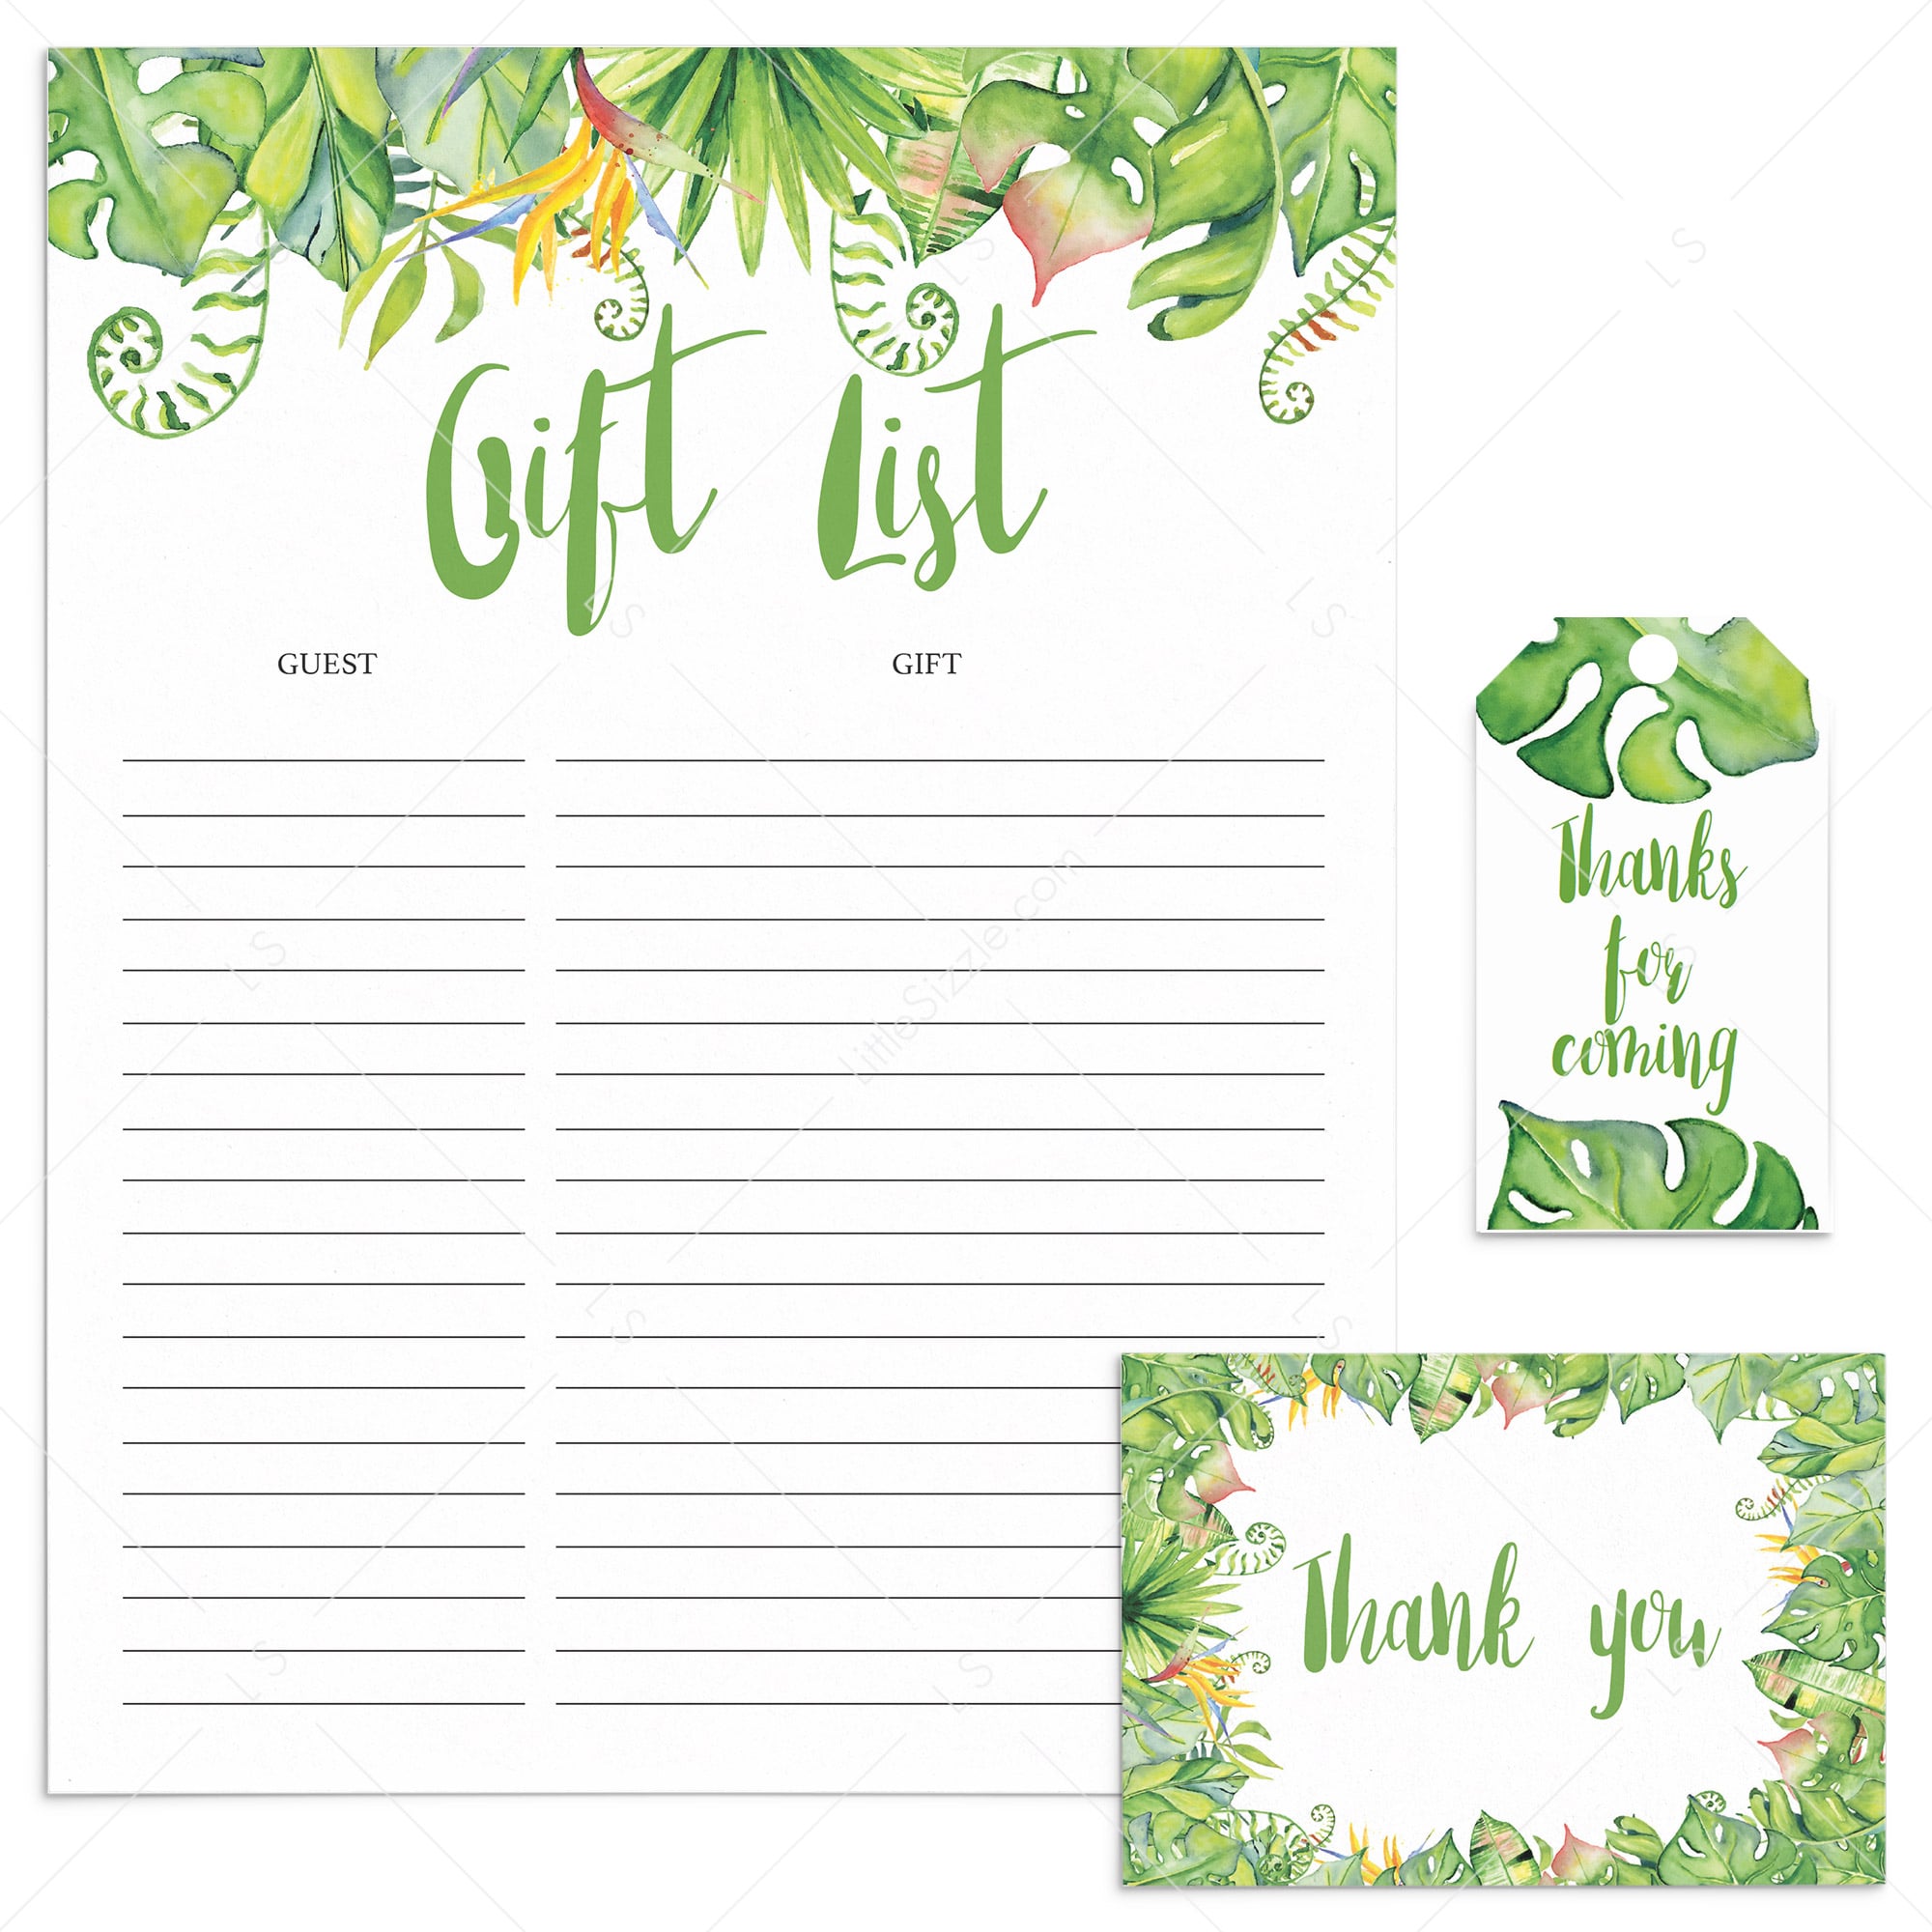 Jungle Party Supplies Cards, Tags and Planner Sheets by LittleSizzle